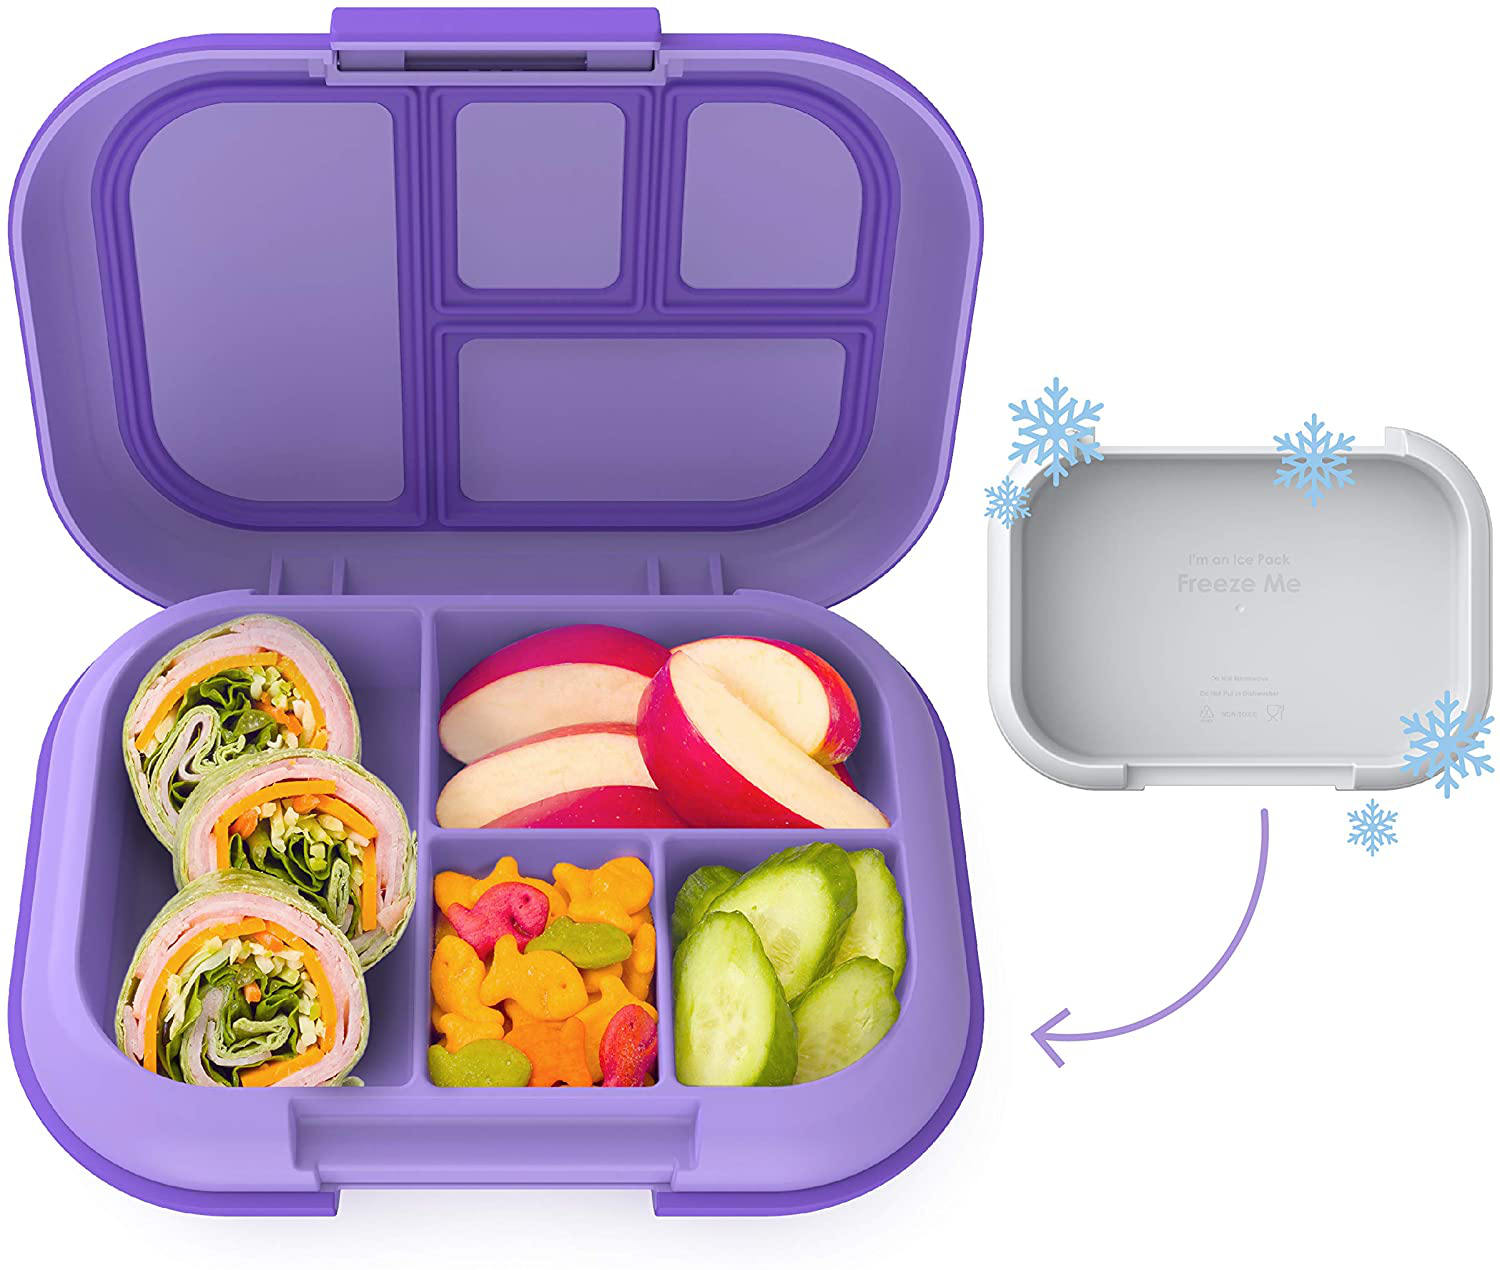 Bento-Style Lunch Solution with 4 Compartments and Removable Ice Pack for Meals and Snacks On-the-Go - Leak-Proof, Dishwasher Safe, BPA-Free